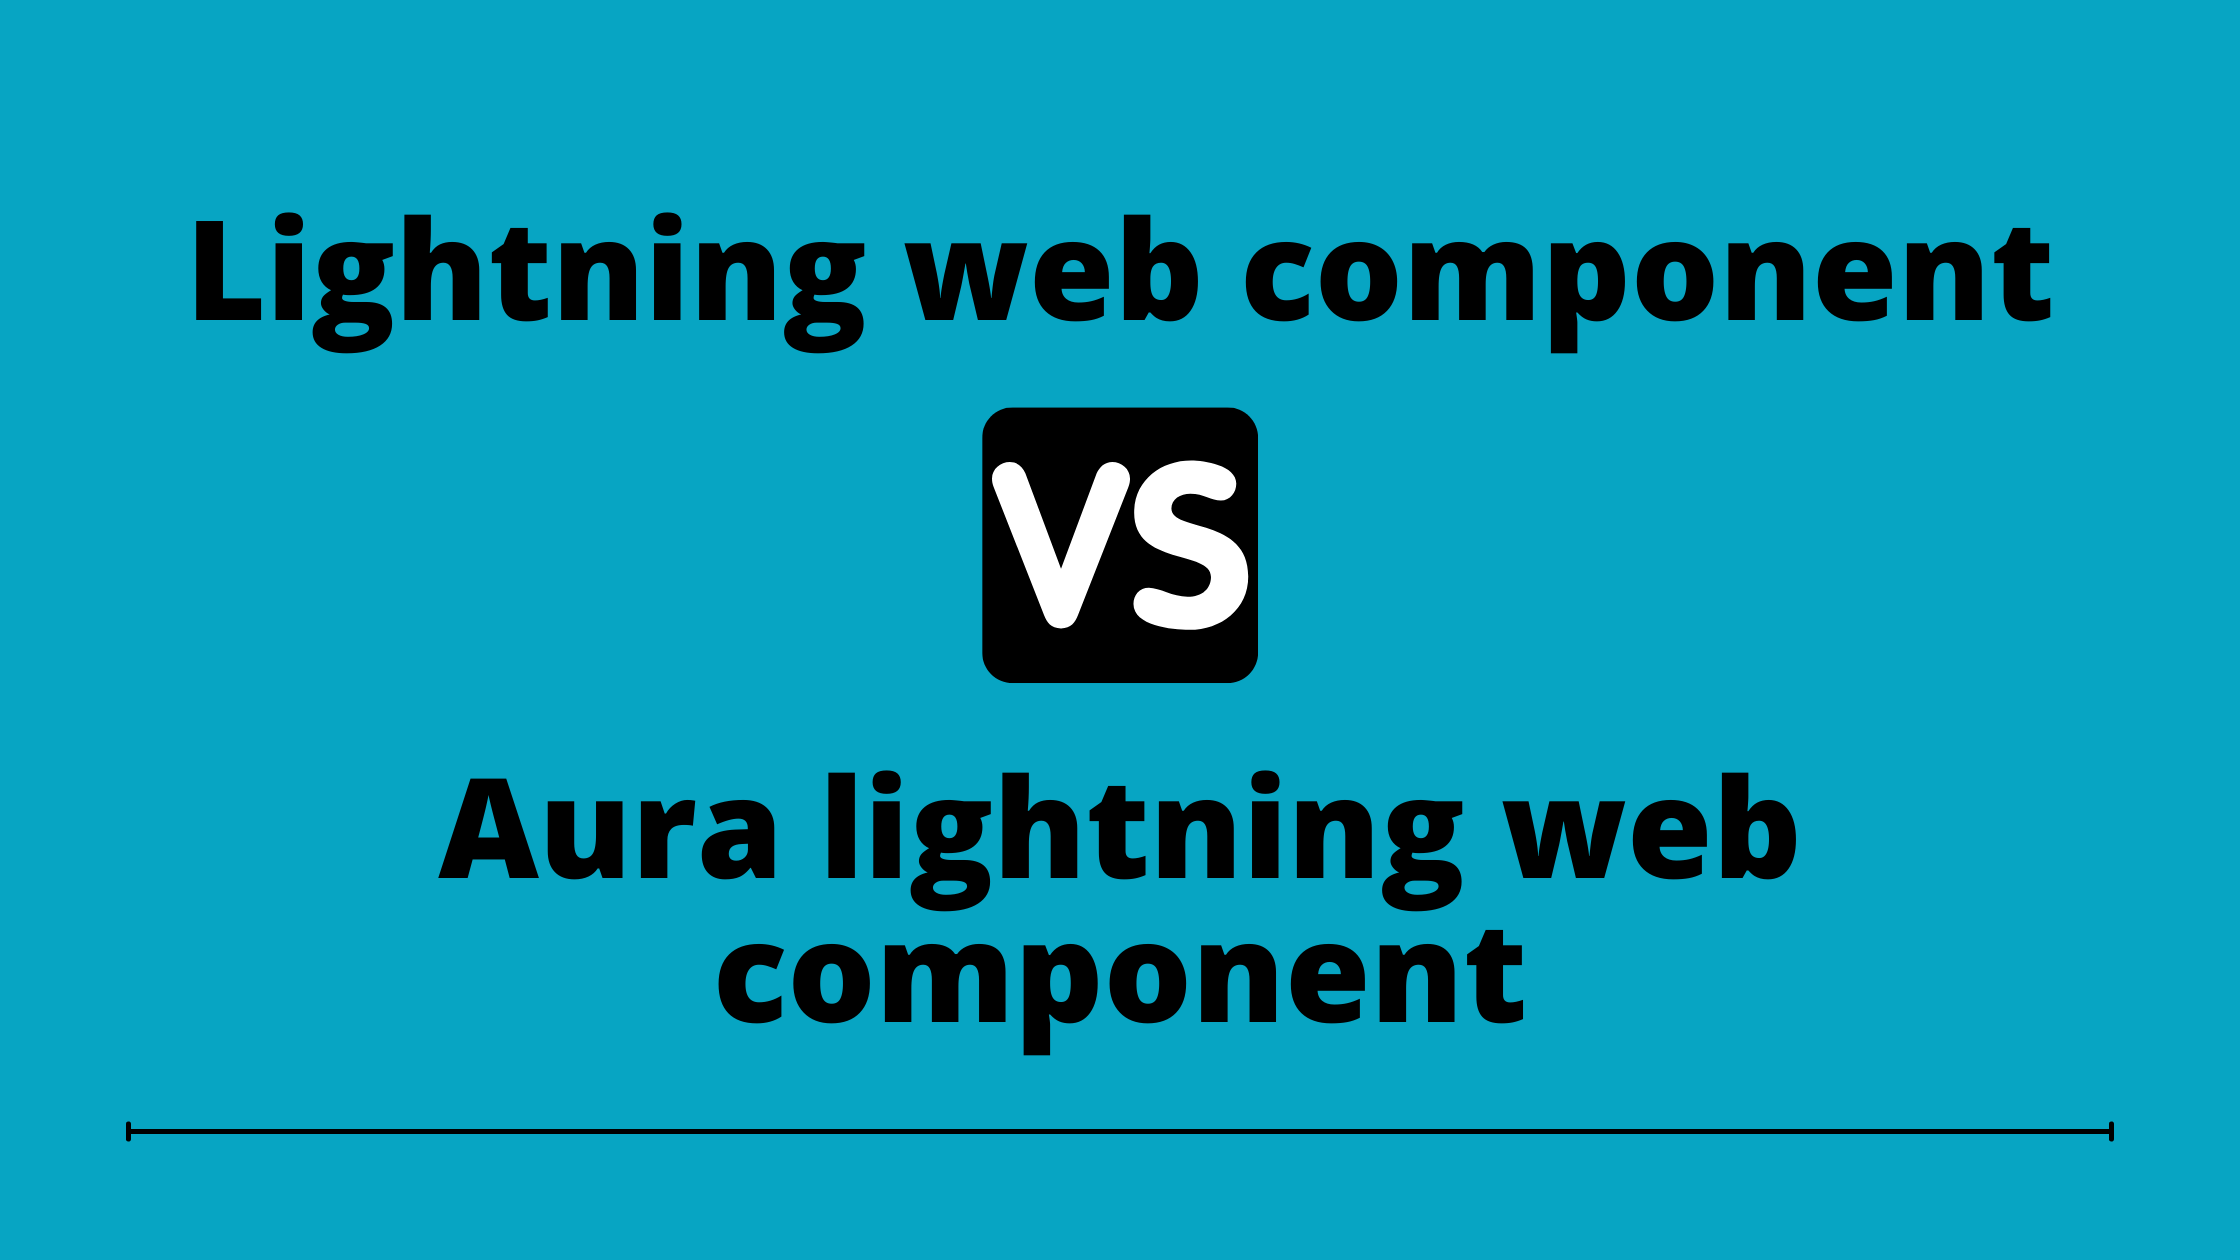 features of lightning web component and auro lightning web component